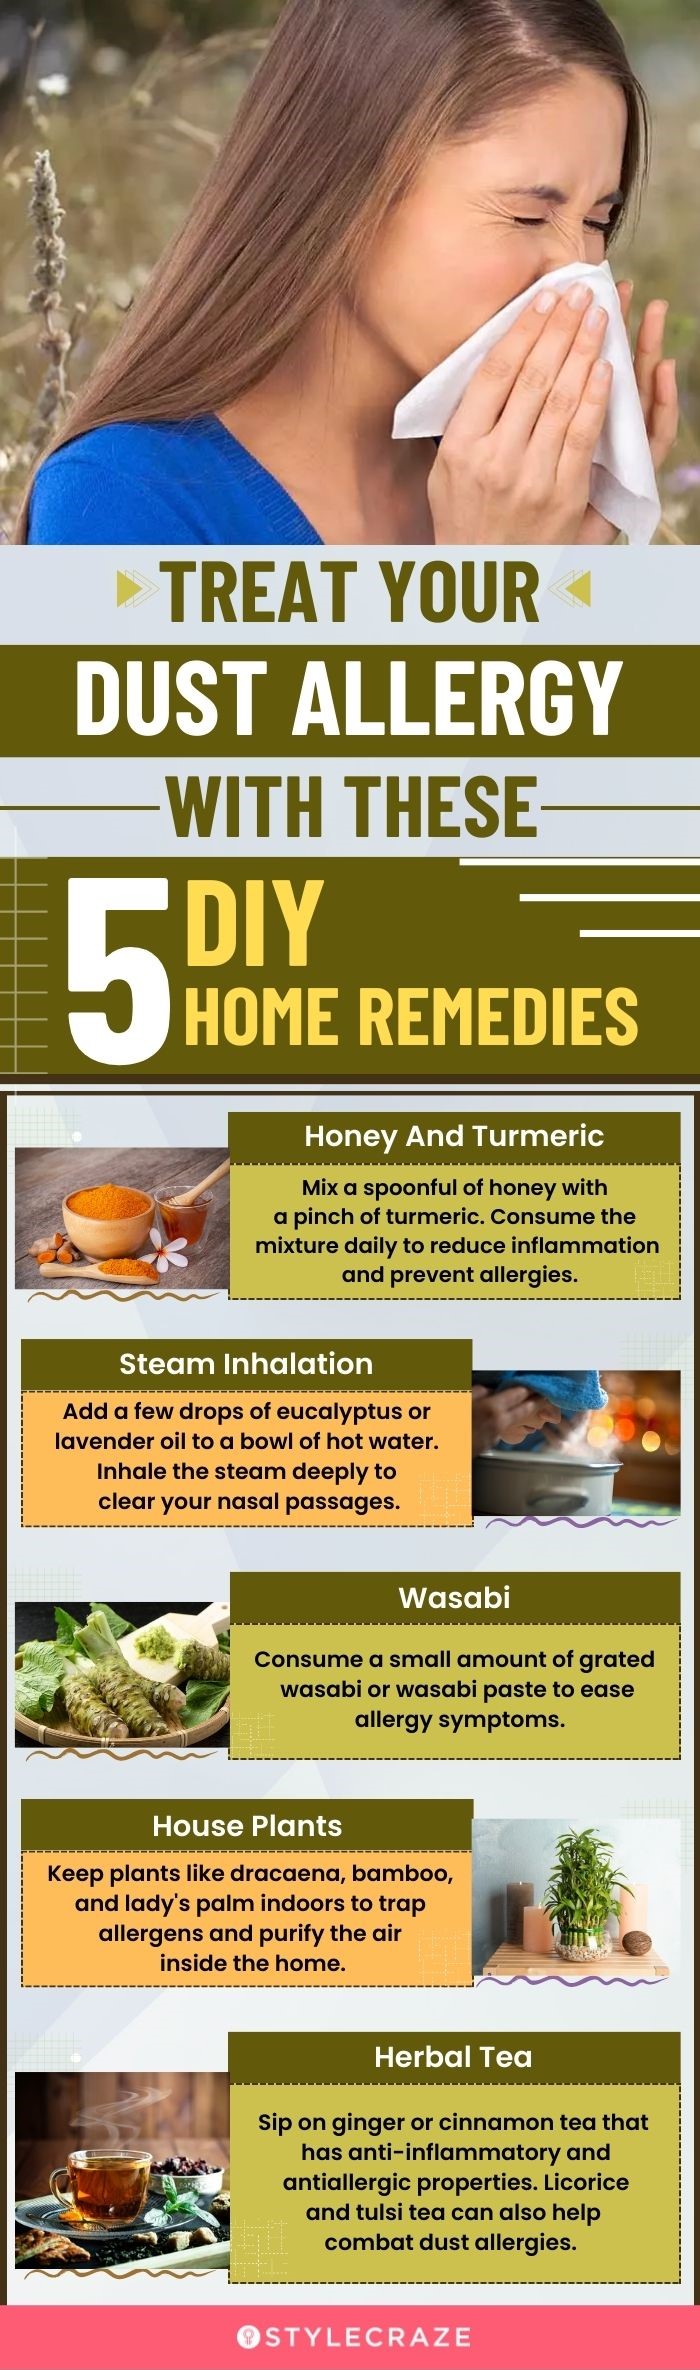 treat your dust allergy with these 5 diy home remedies (infographic)